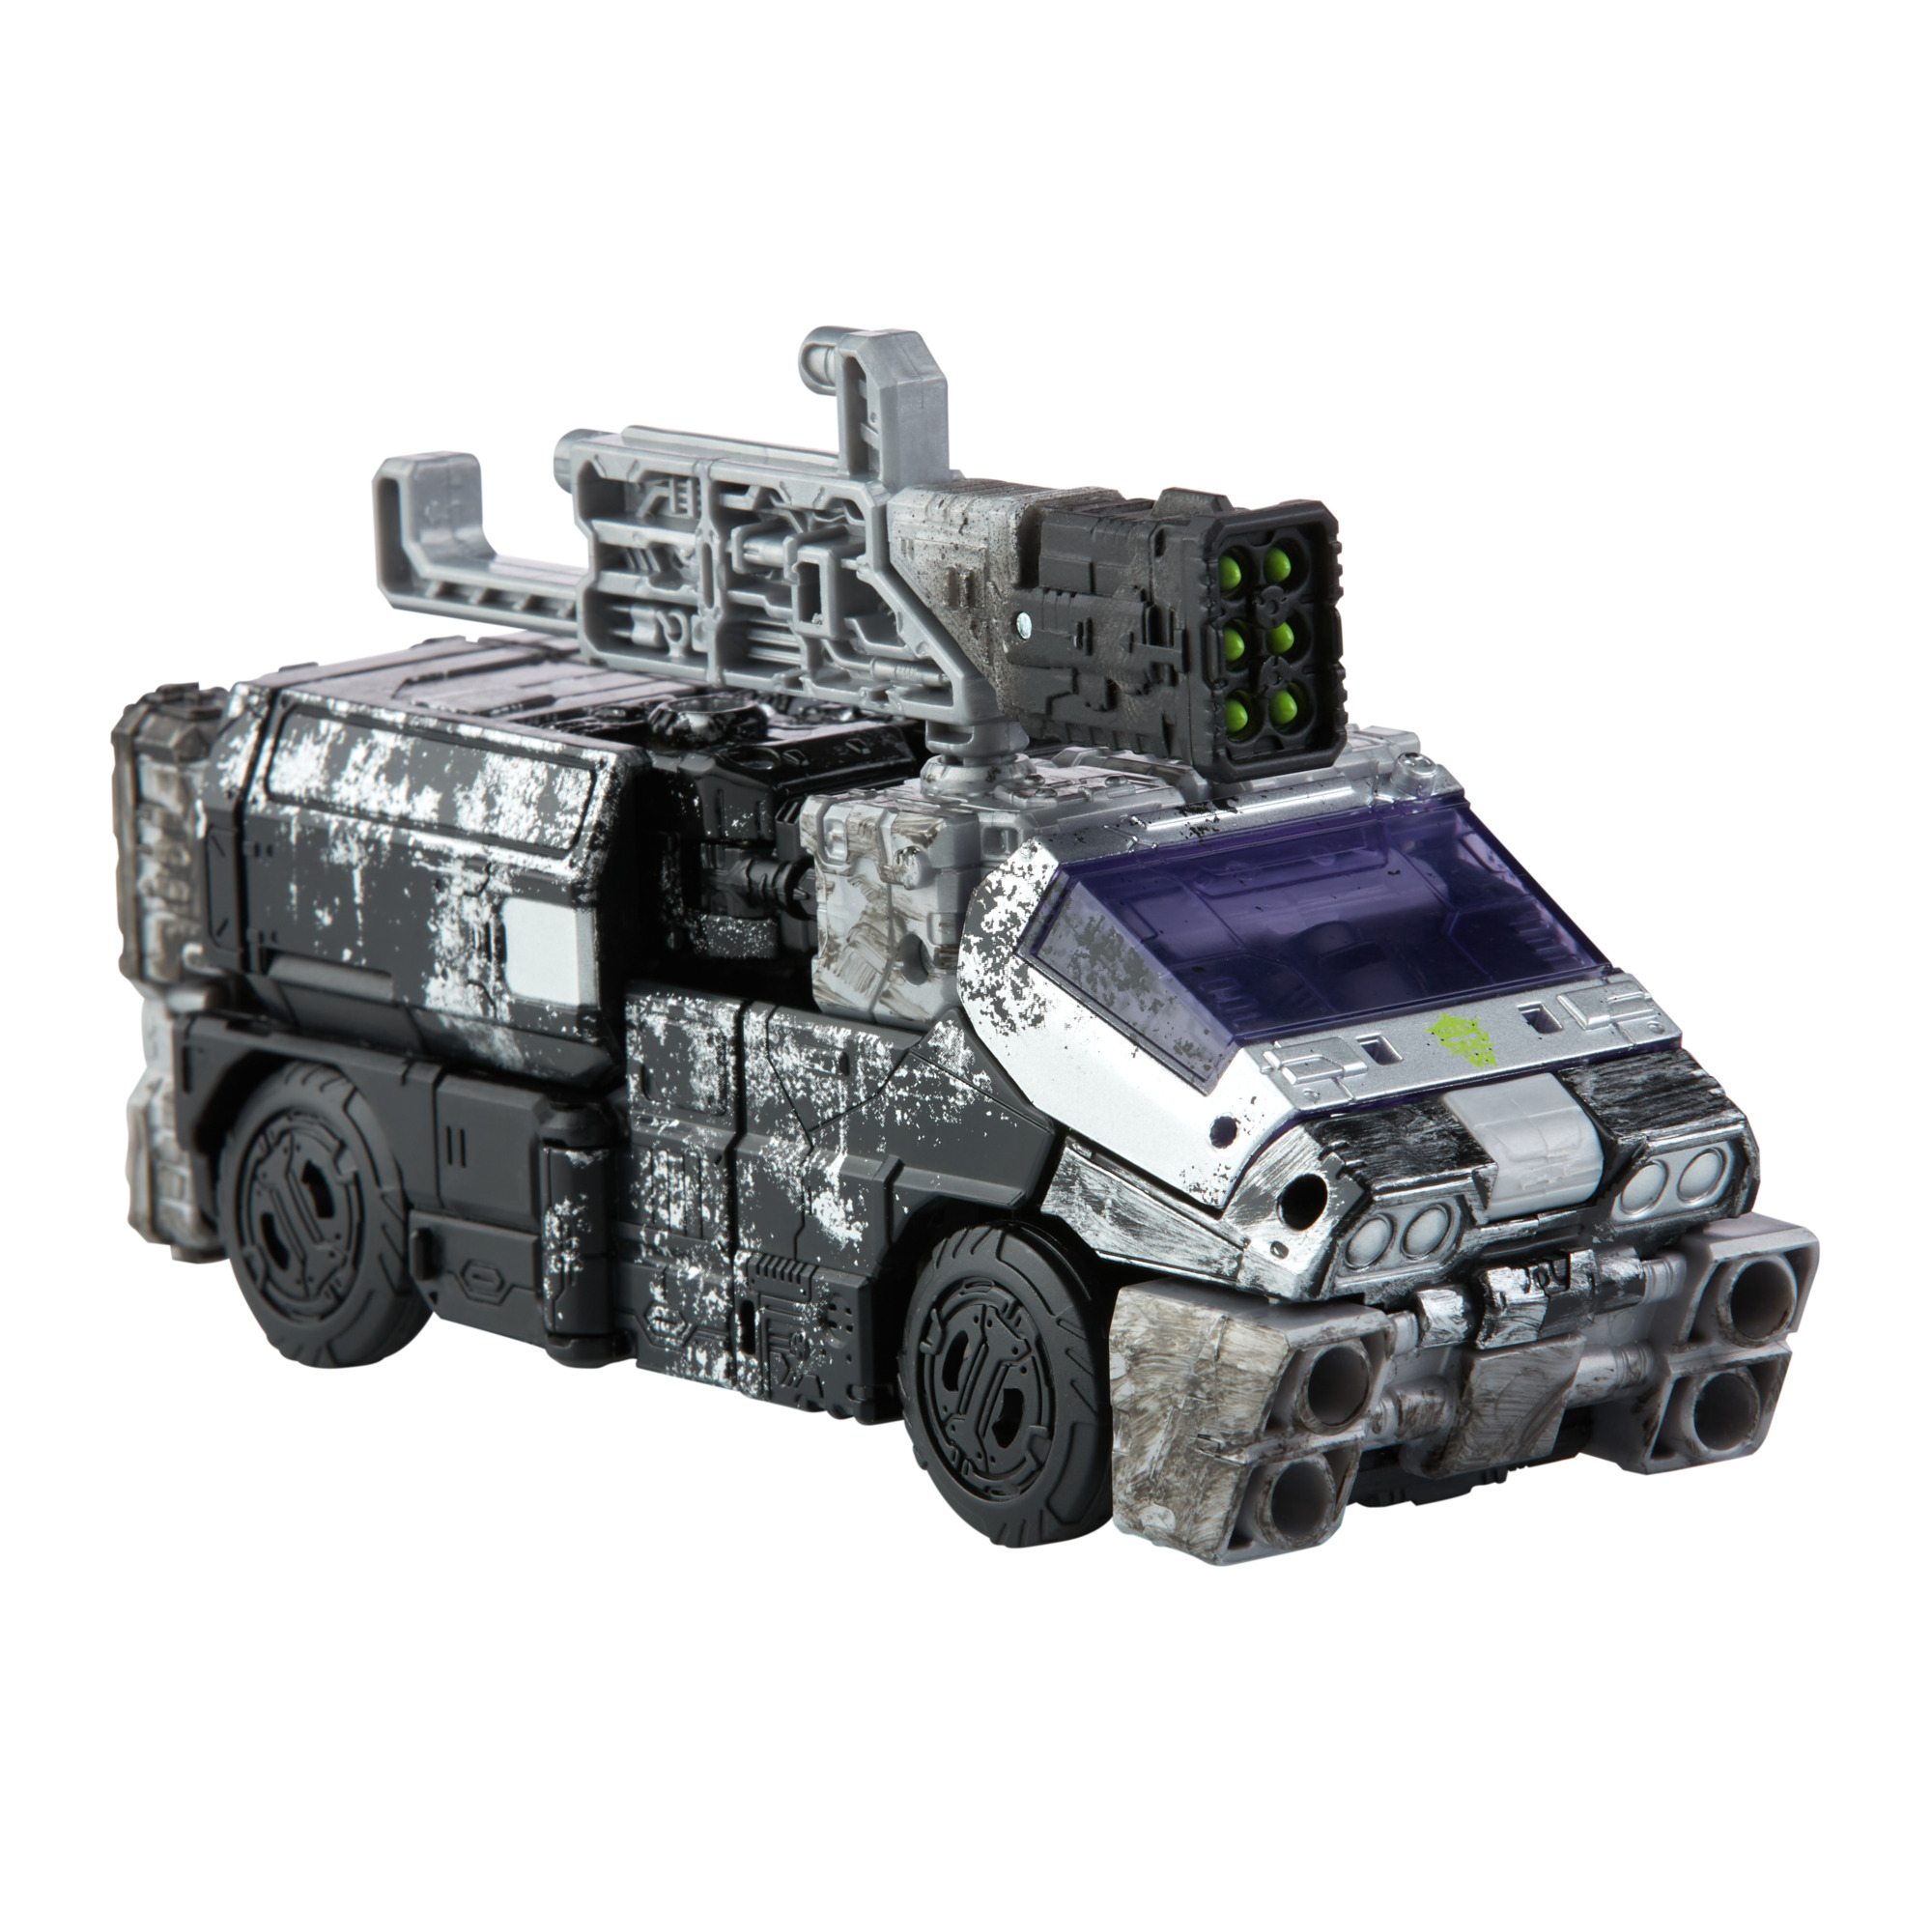 Transformers: War for Cybertron Deseeus Army Drone Kids Toy Action Figure - image 3 of 7